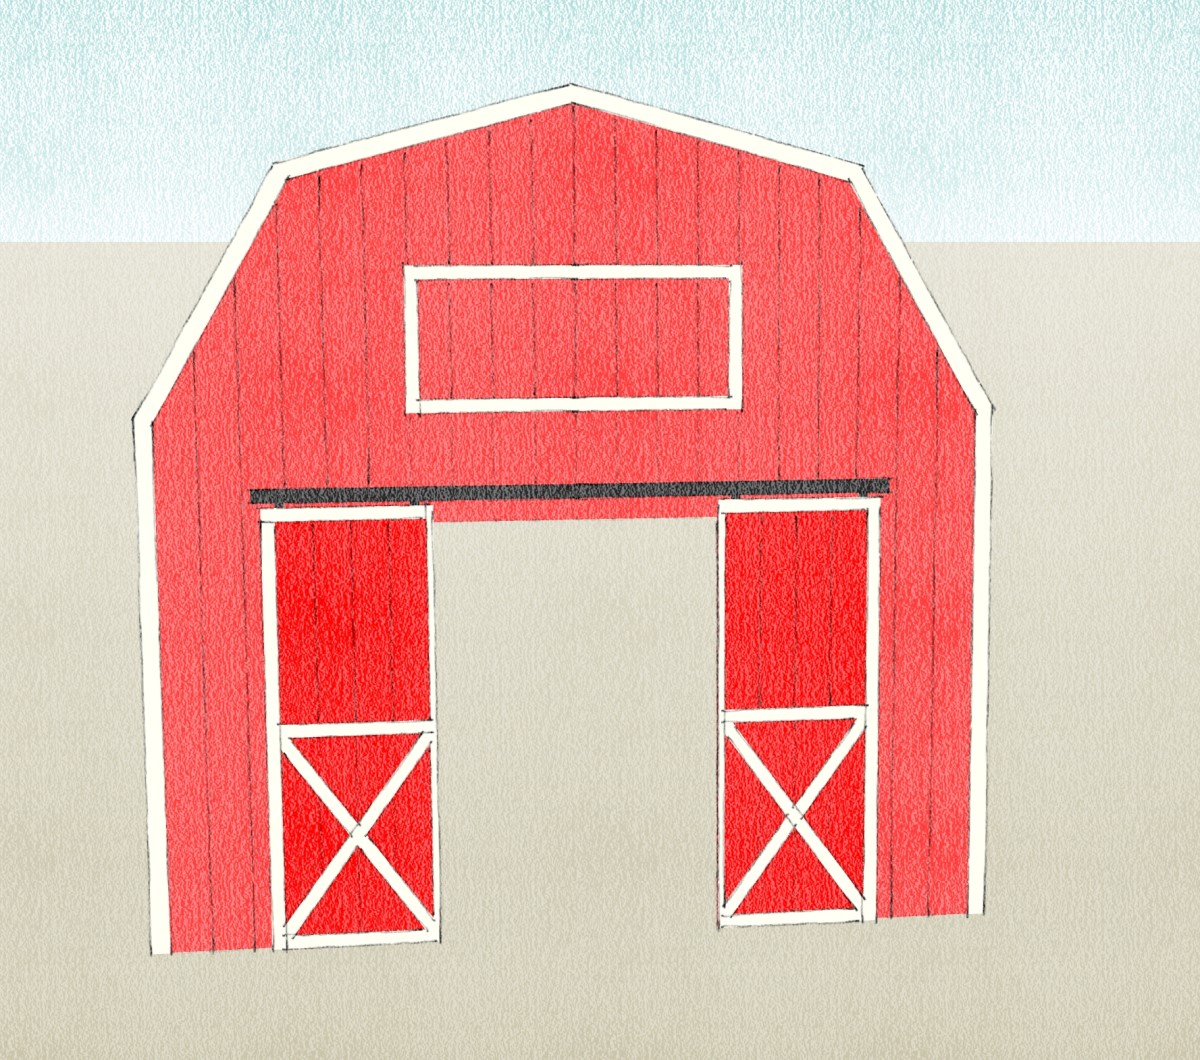 8'x8' Prop - Red Barn